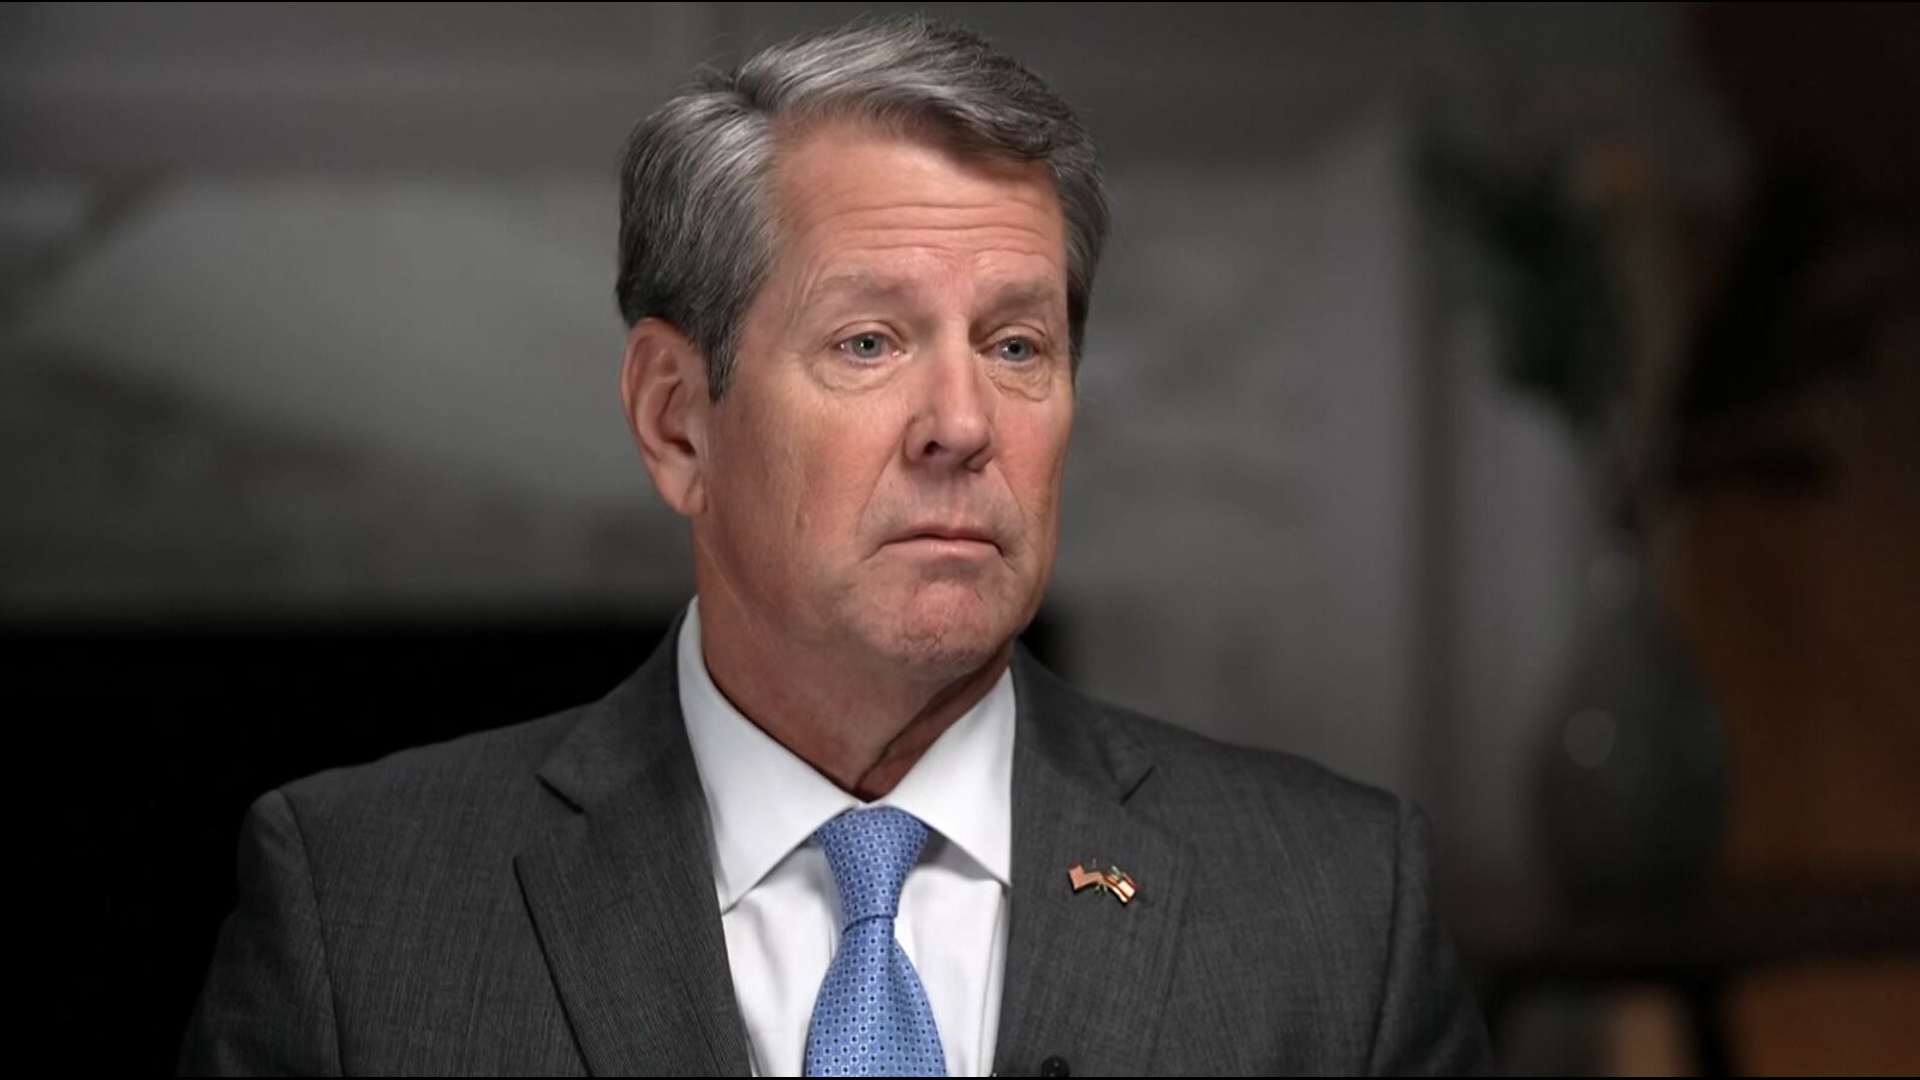 Gov. Brian Kemp revealed to CNN that he did not vote for former President Donald Trump during Georgia's Republican Presidential Primary.